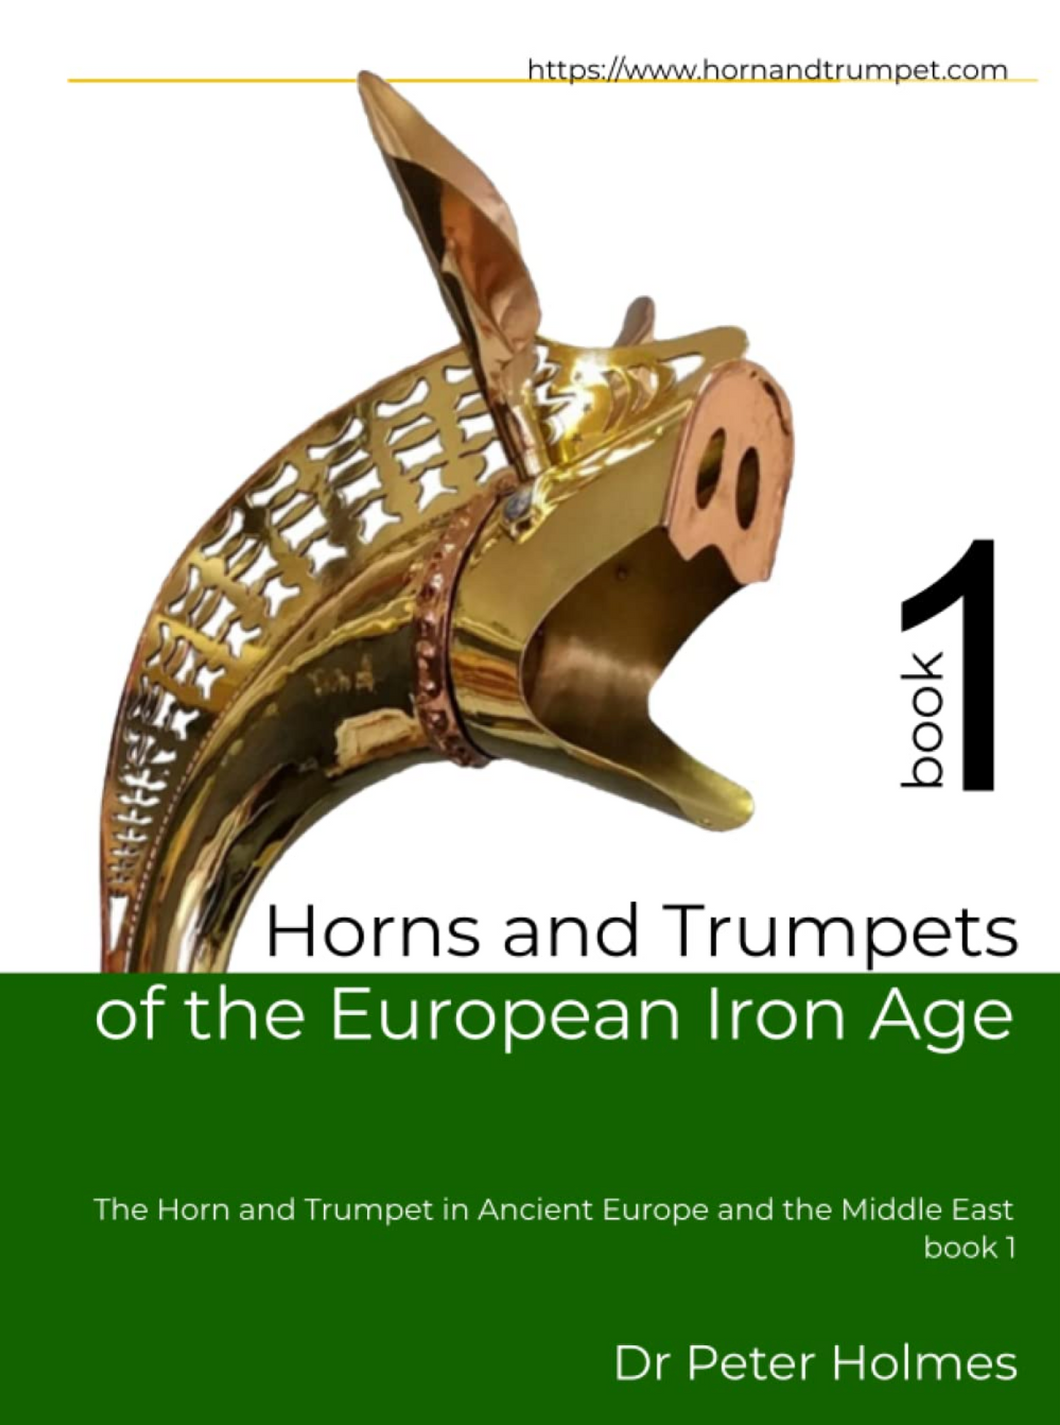 Horns and Trumpets of the European Iron Age: The Horn and Trumpet in Ancient Europe and the Middle East, bk. 1